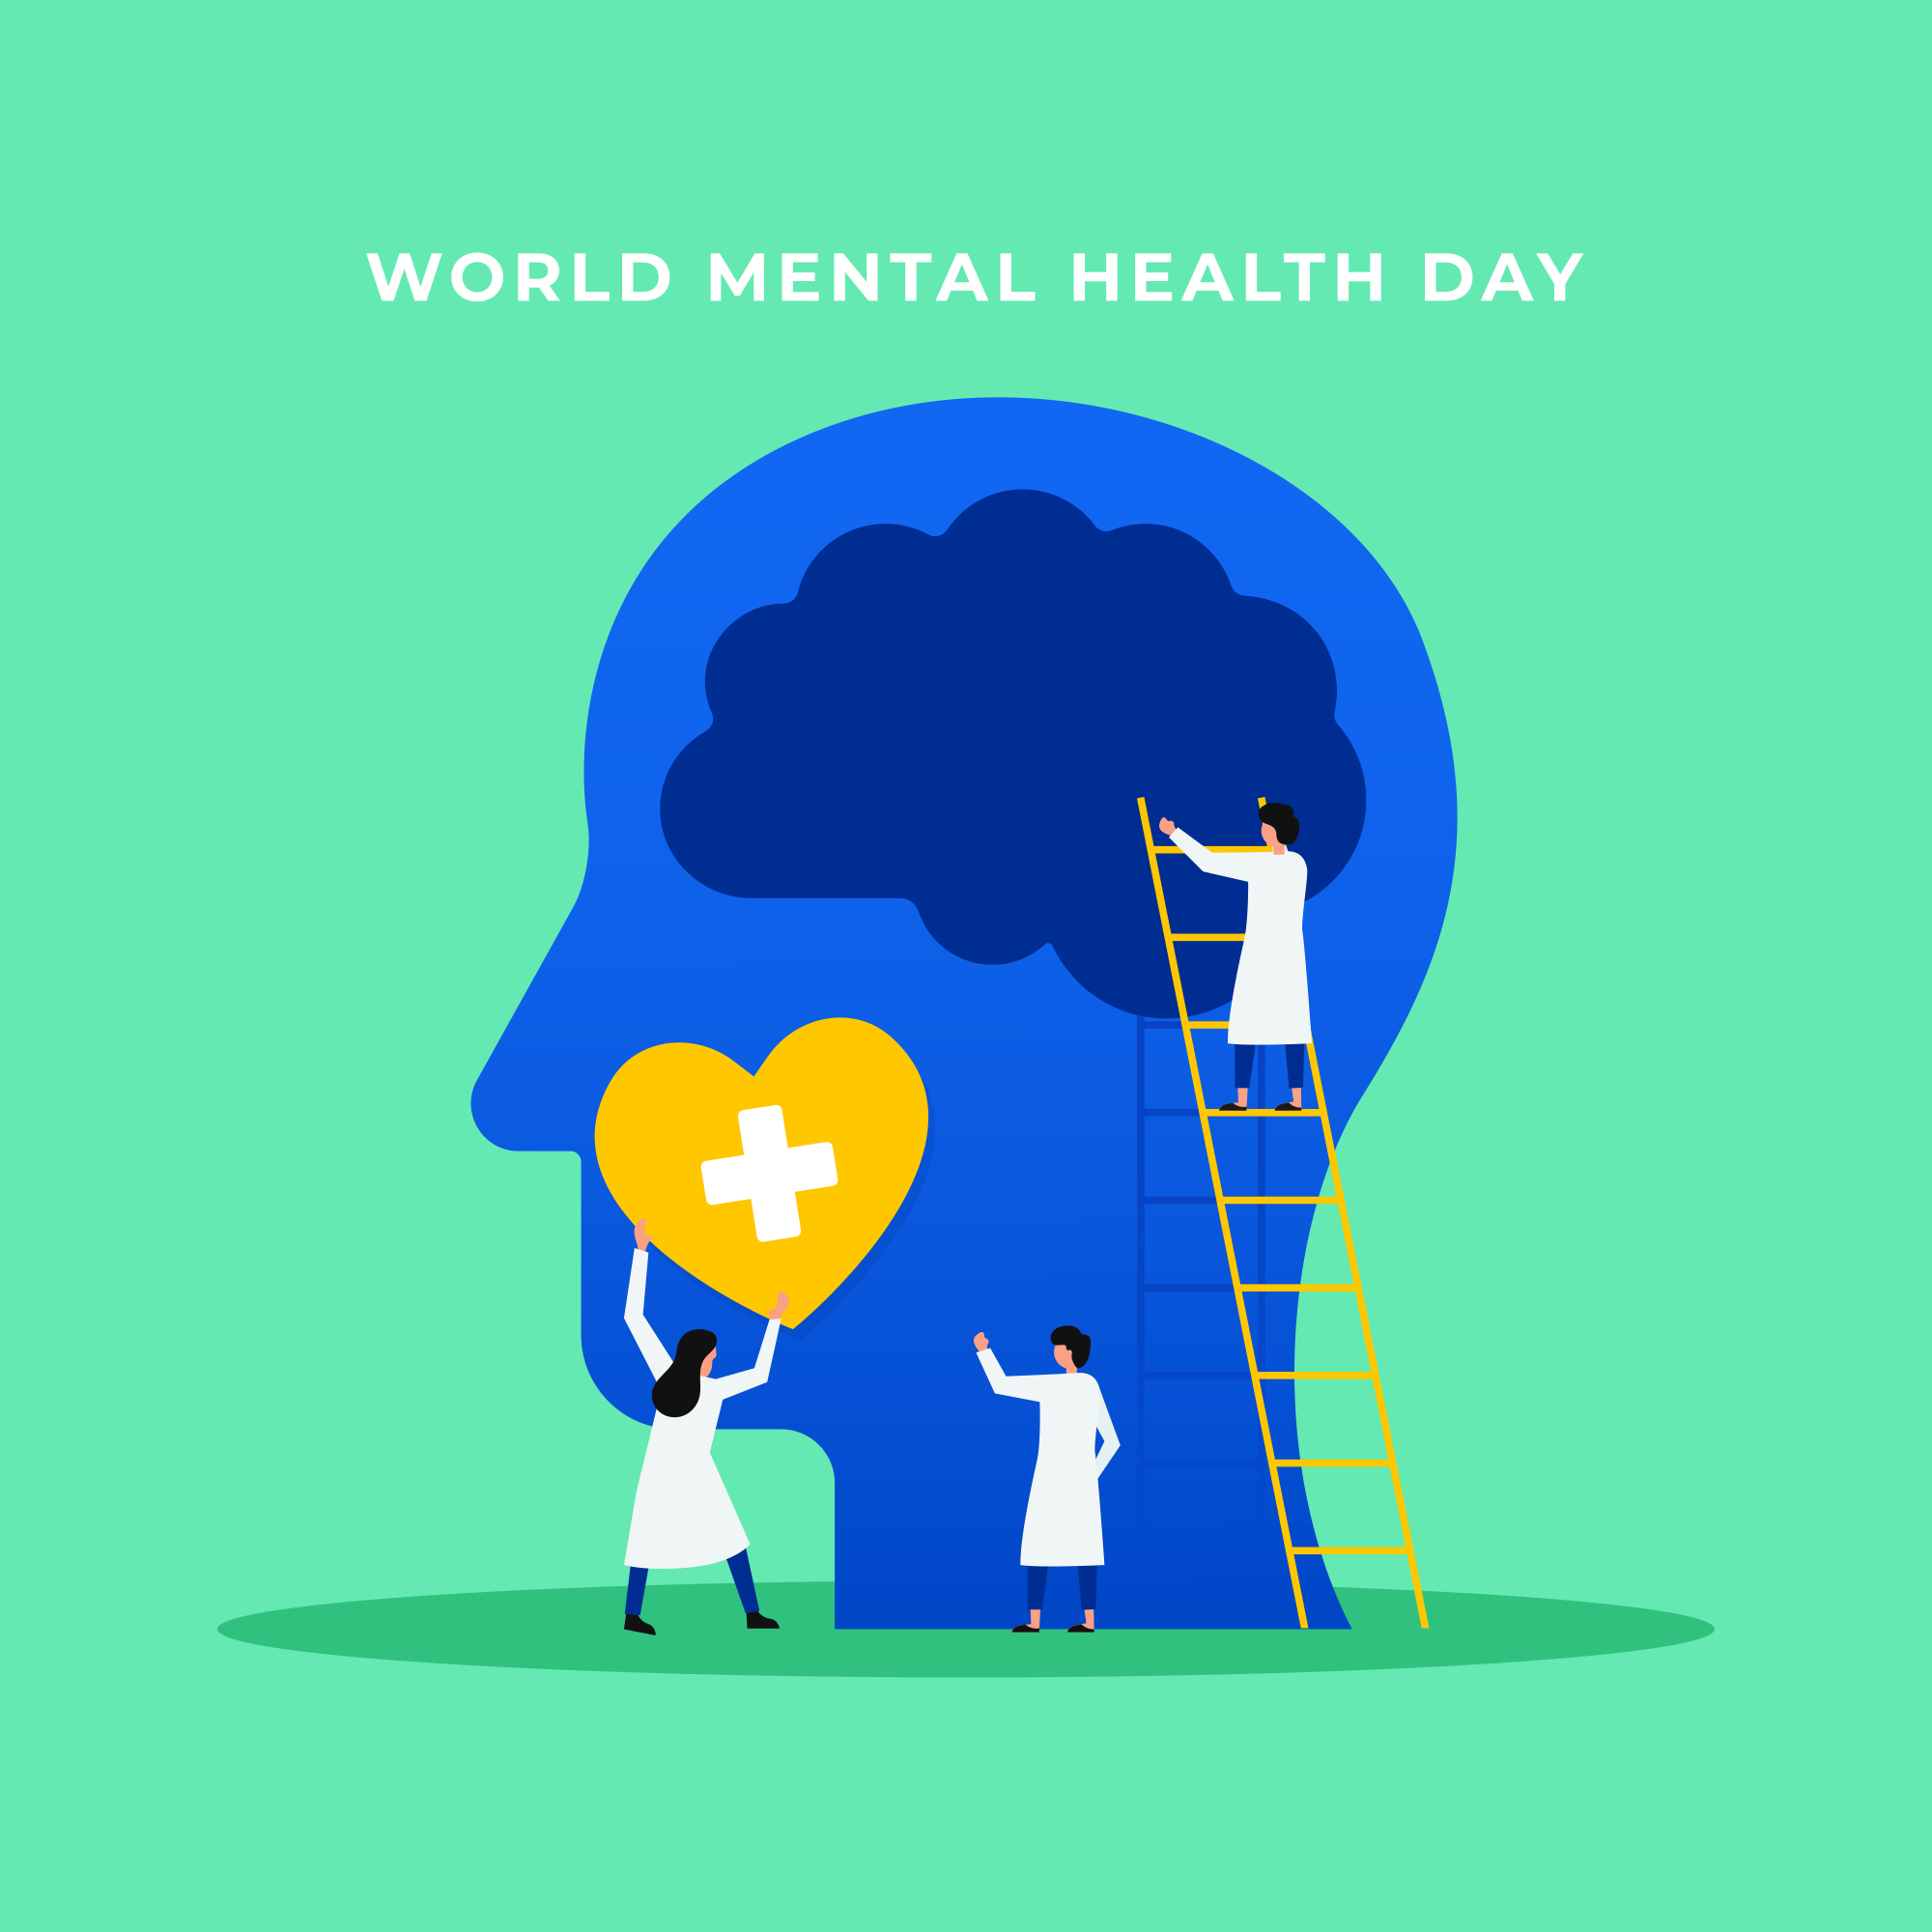 Join us to recognize World Mental Health Day.